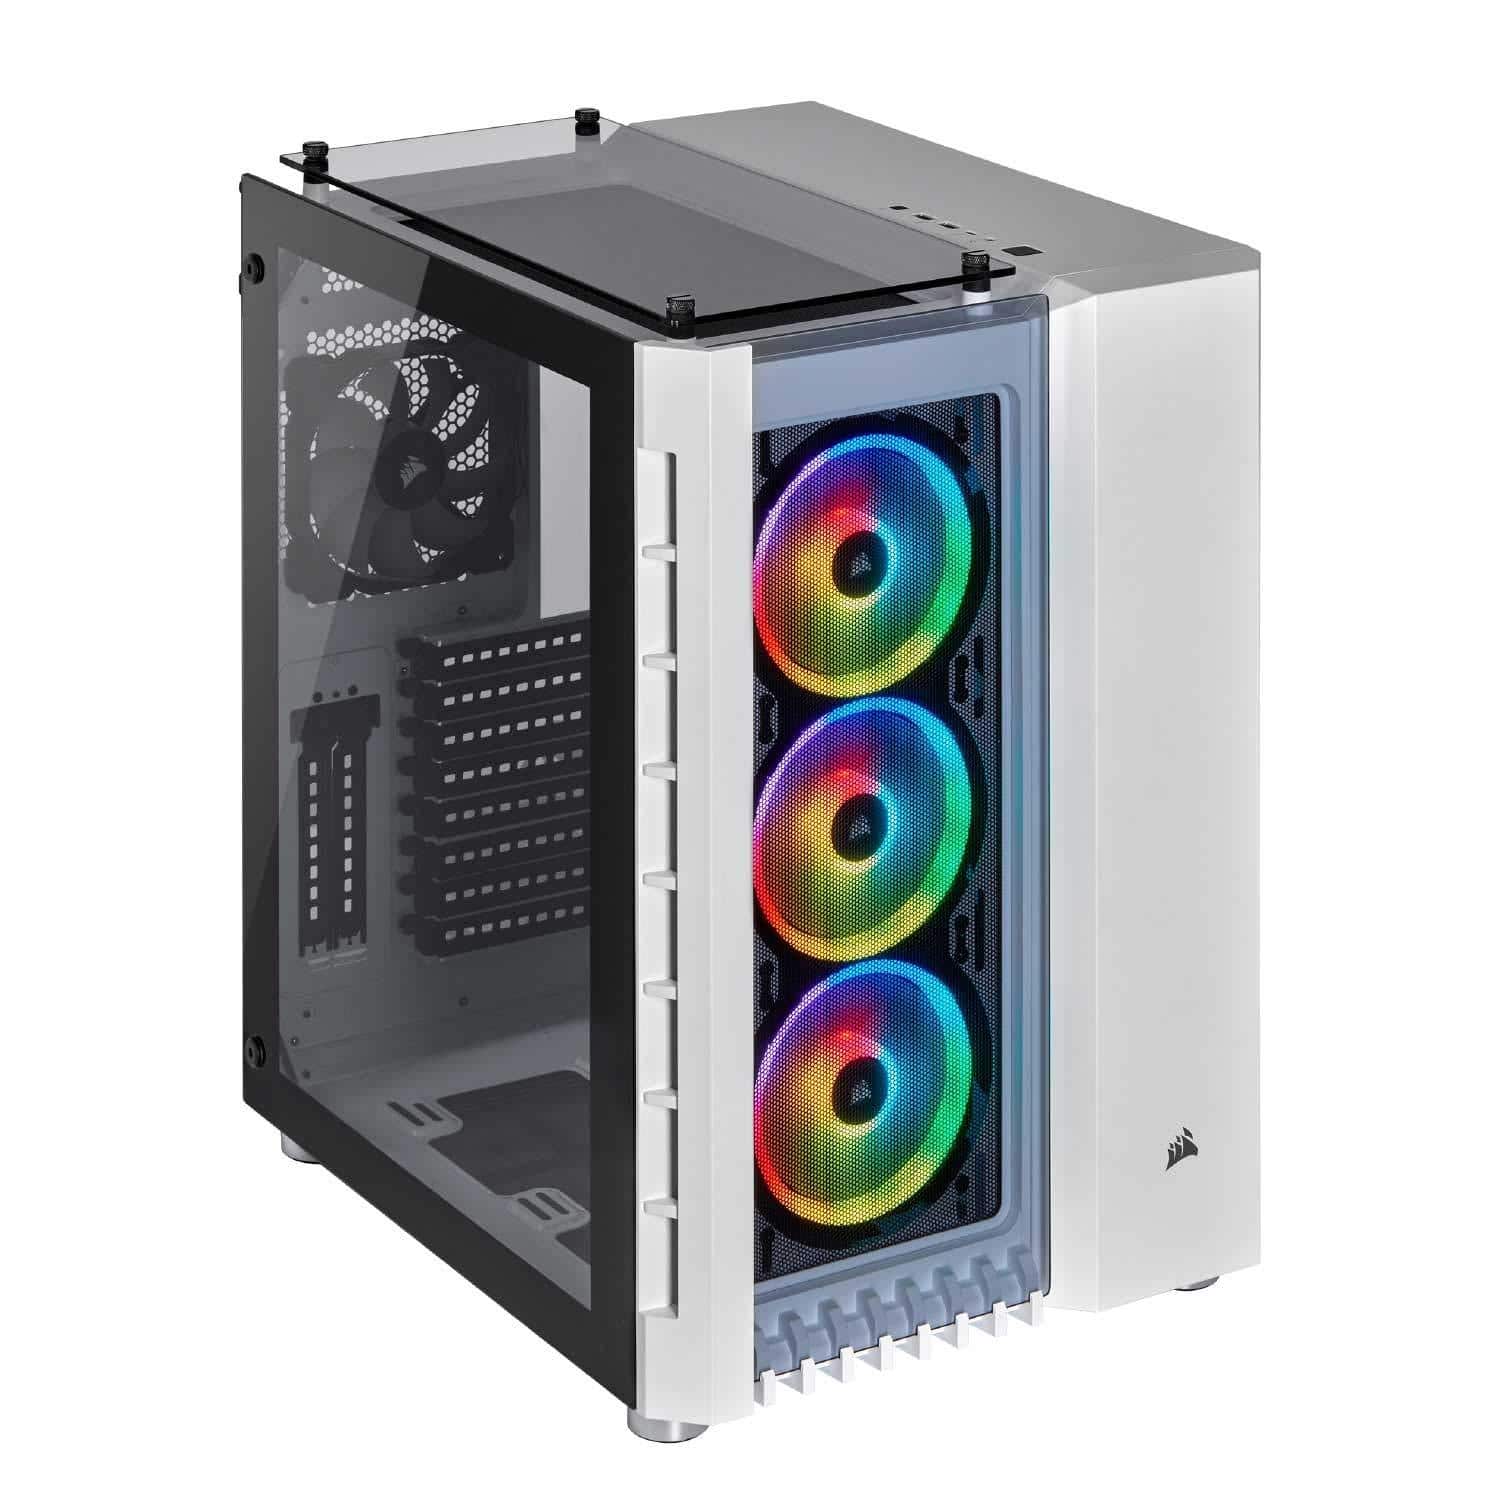 Case CORSAIR Crystal Series 680X RGB - mid tower - extended ATX - Albagame